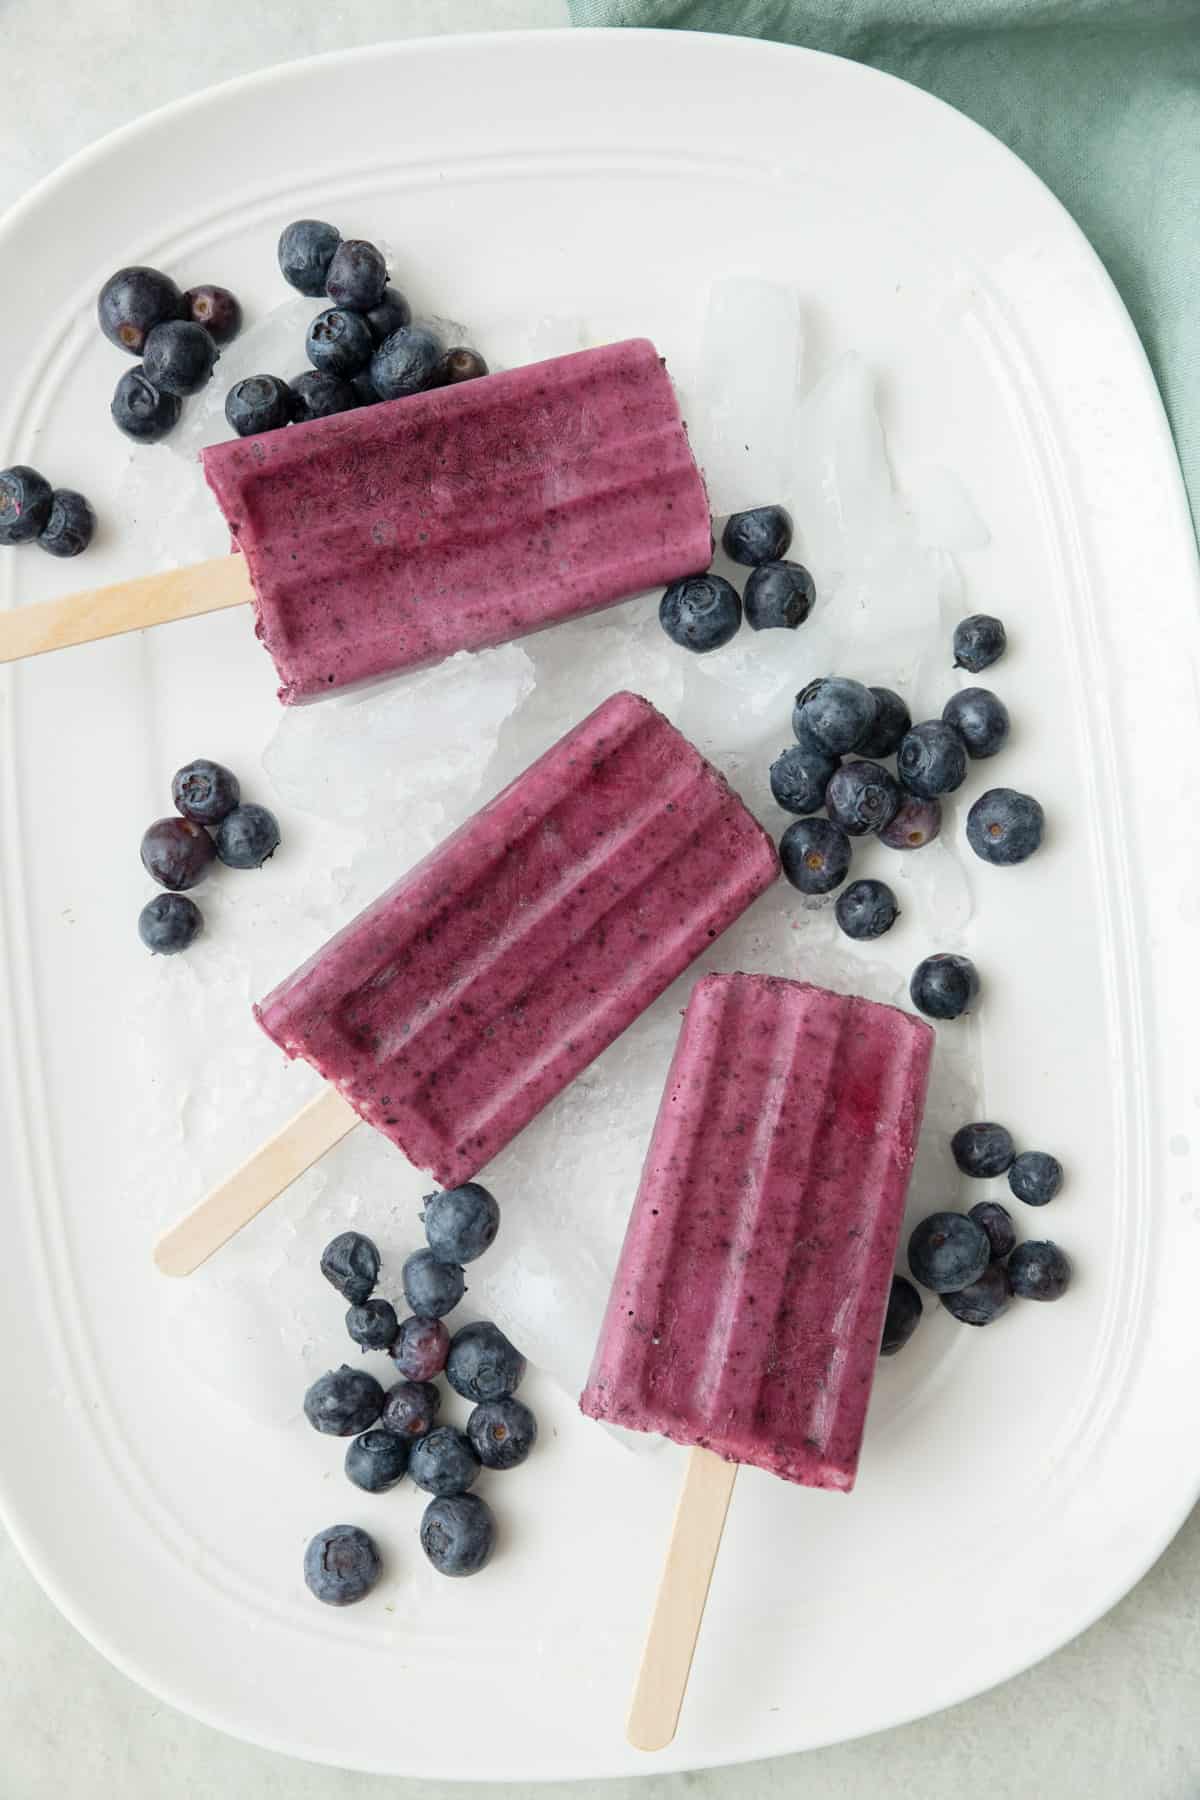 Frozen blueberry yogurt popsicles on a tray of ice with extra blueberries around.